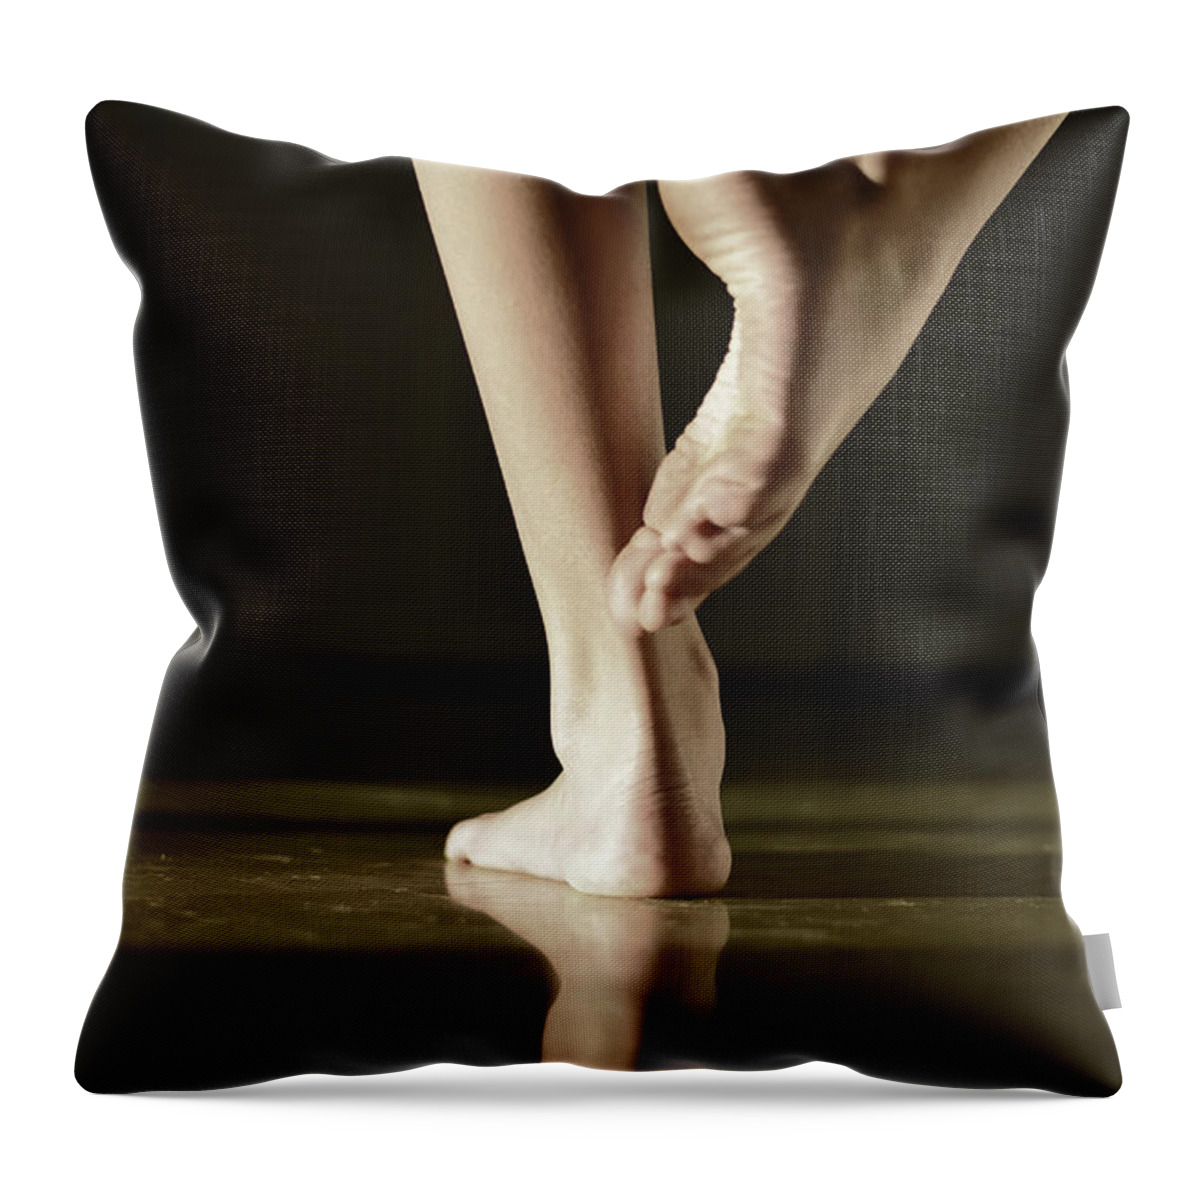 Dancer Art Throw Pillow featuring the photograph Dancer #1 by Laura Fasulo